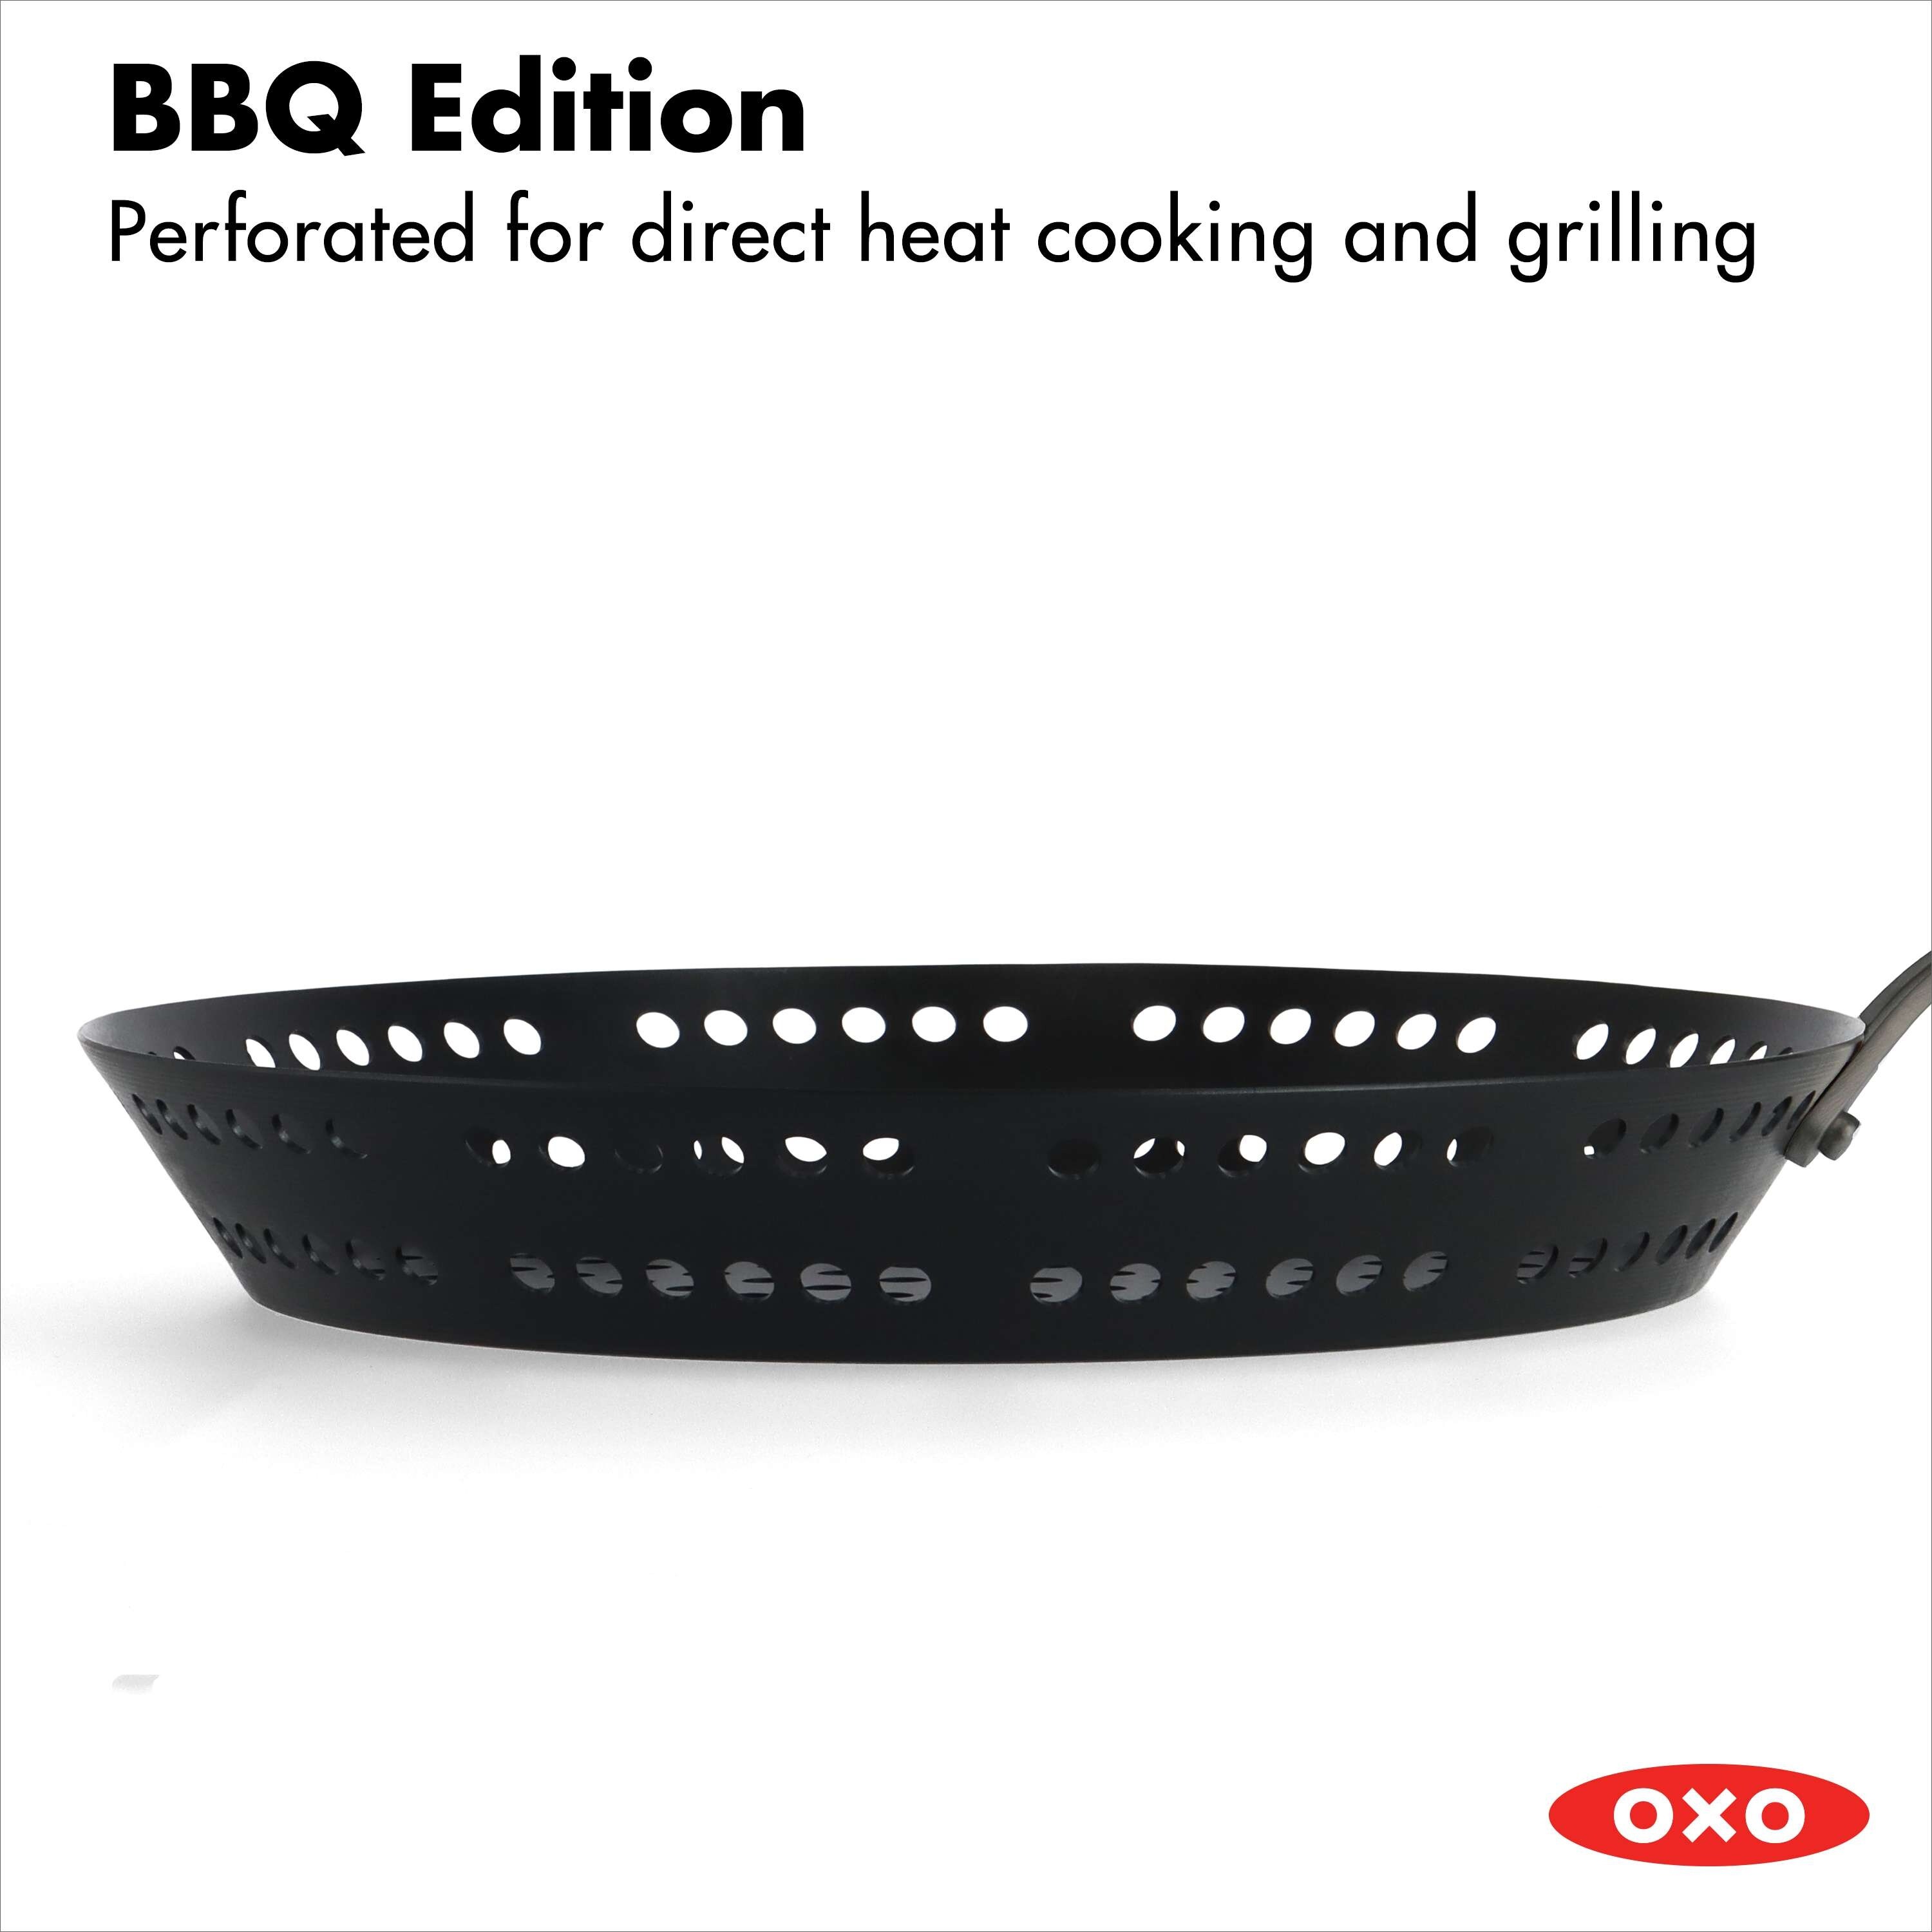 https://ak1.ostkcdn.com/images/products/is/images/direct/c5021200ce5dbf4cee582865e080f44cc5841155/OXO-Black-Steel-BBQ-Fry-Pan-12%22-w--Silicone-Sleeve.jpg